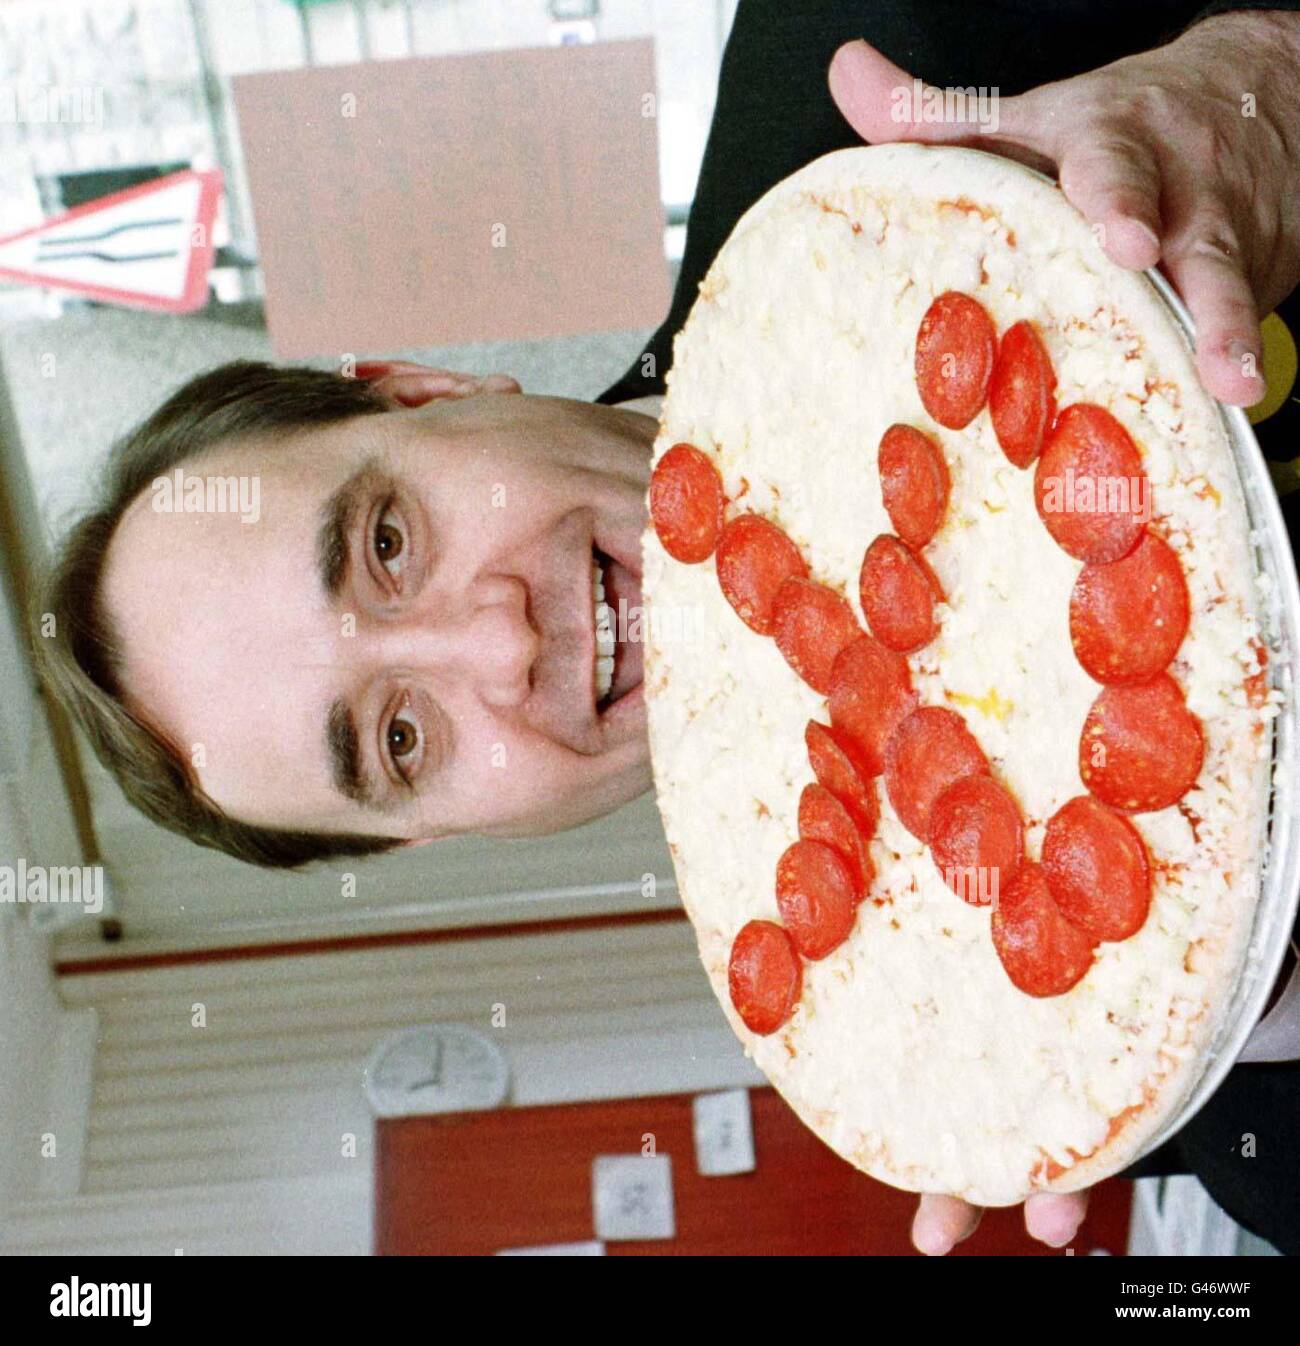 Alex Salmond was presented with this pizza carrying the SNP logo, when he visited a shop in Fraserburgh, Scotland, this morning (Thursday). Earlier Mr Salmond cast his vote in the general election. PA. Stock Photo